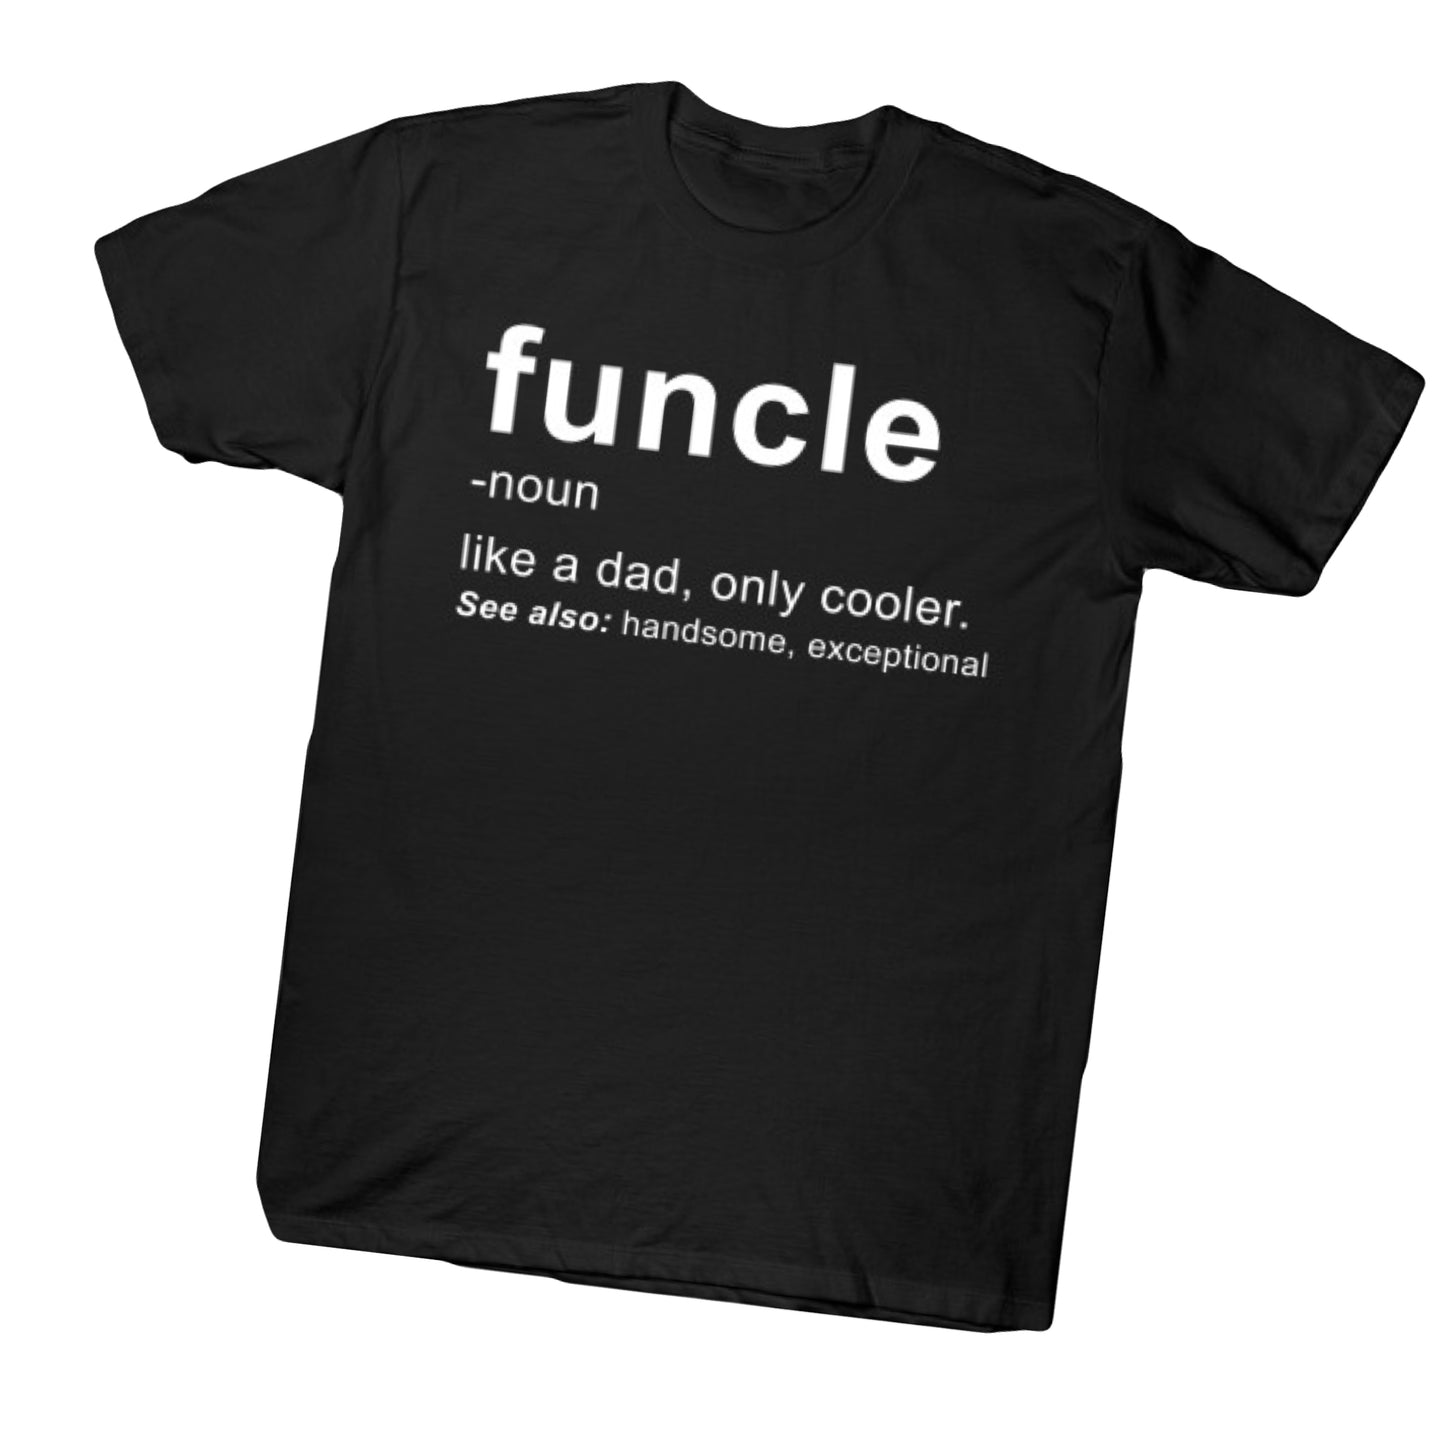 Funcle Shirt, Fun uncle shirt, funny gift for brother, funny uncle shirt, funny uncle gift, gift for him